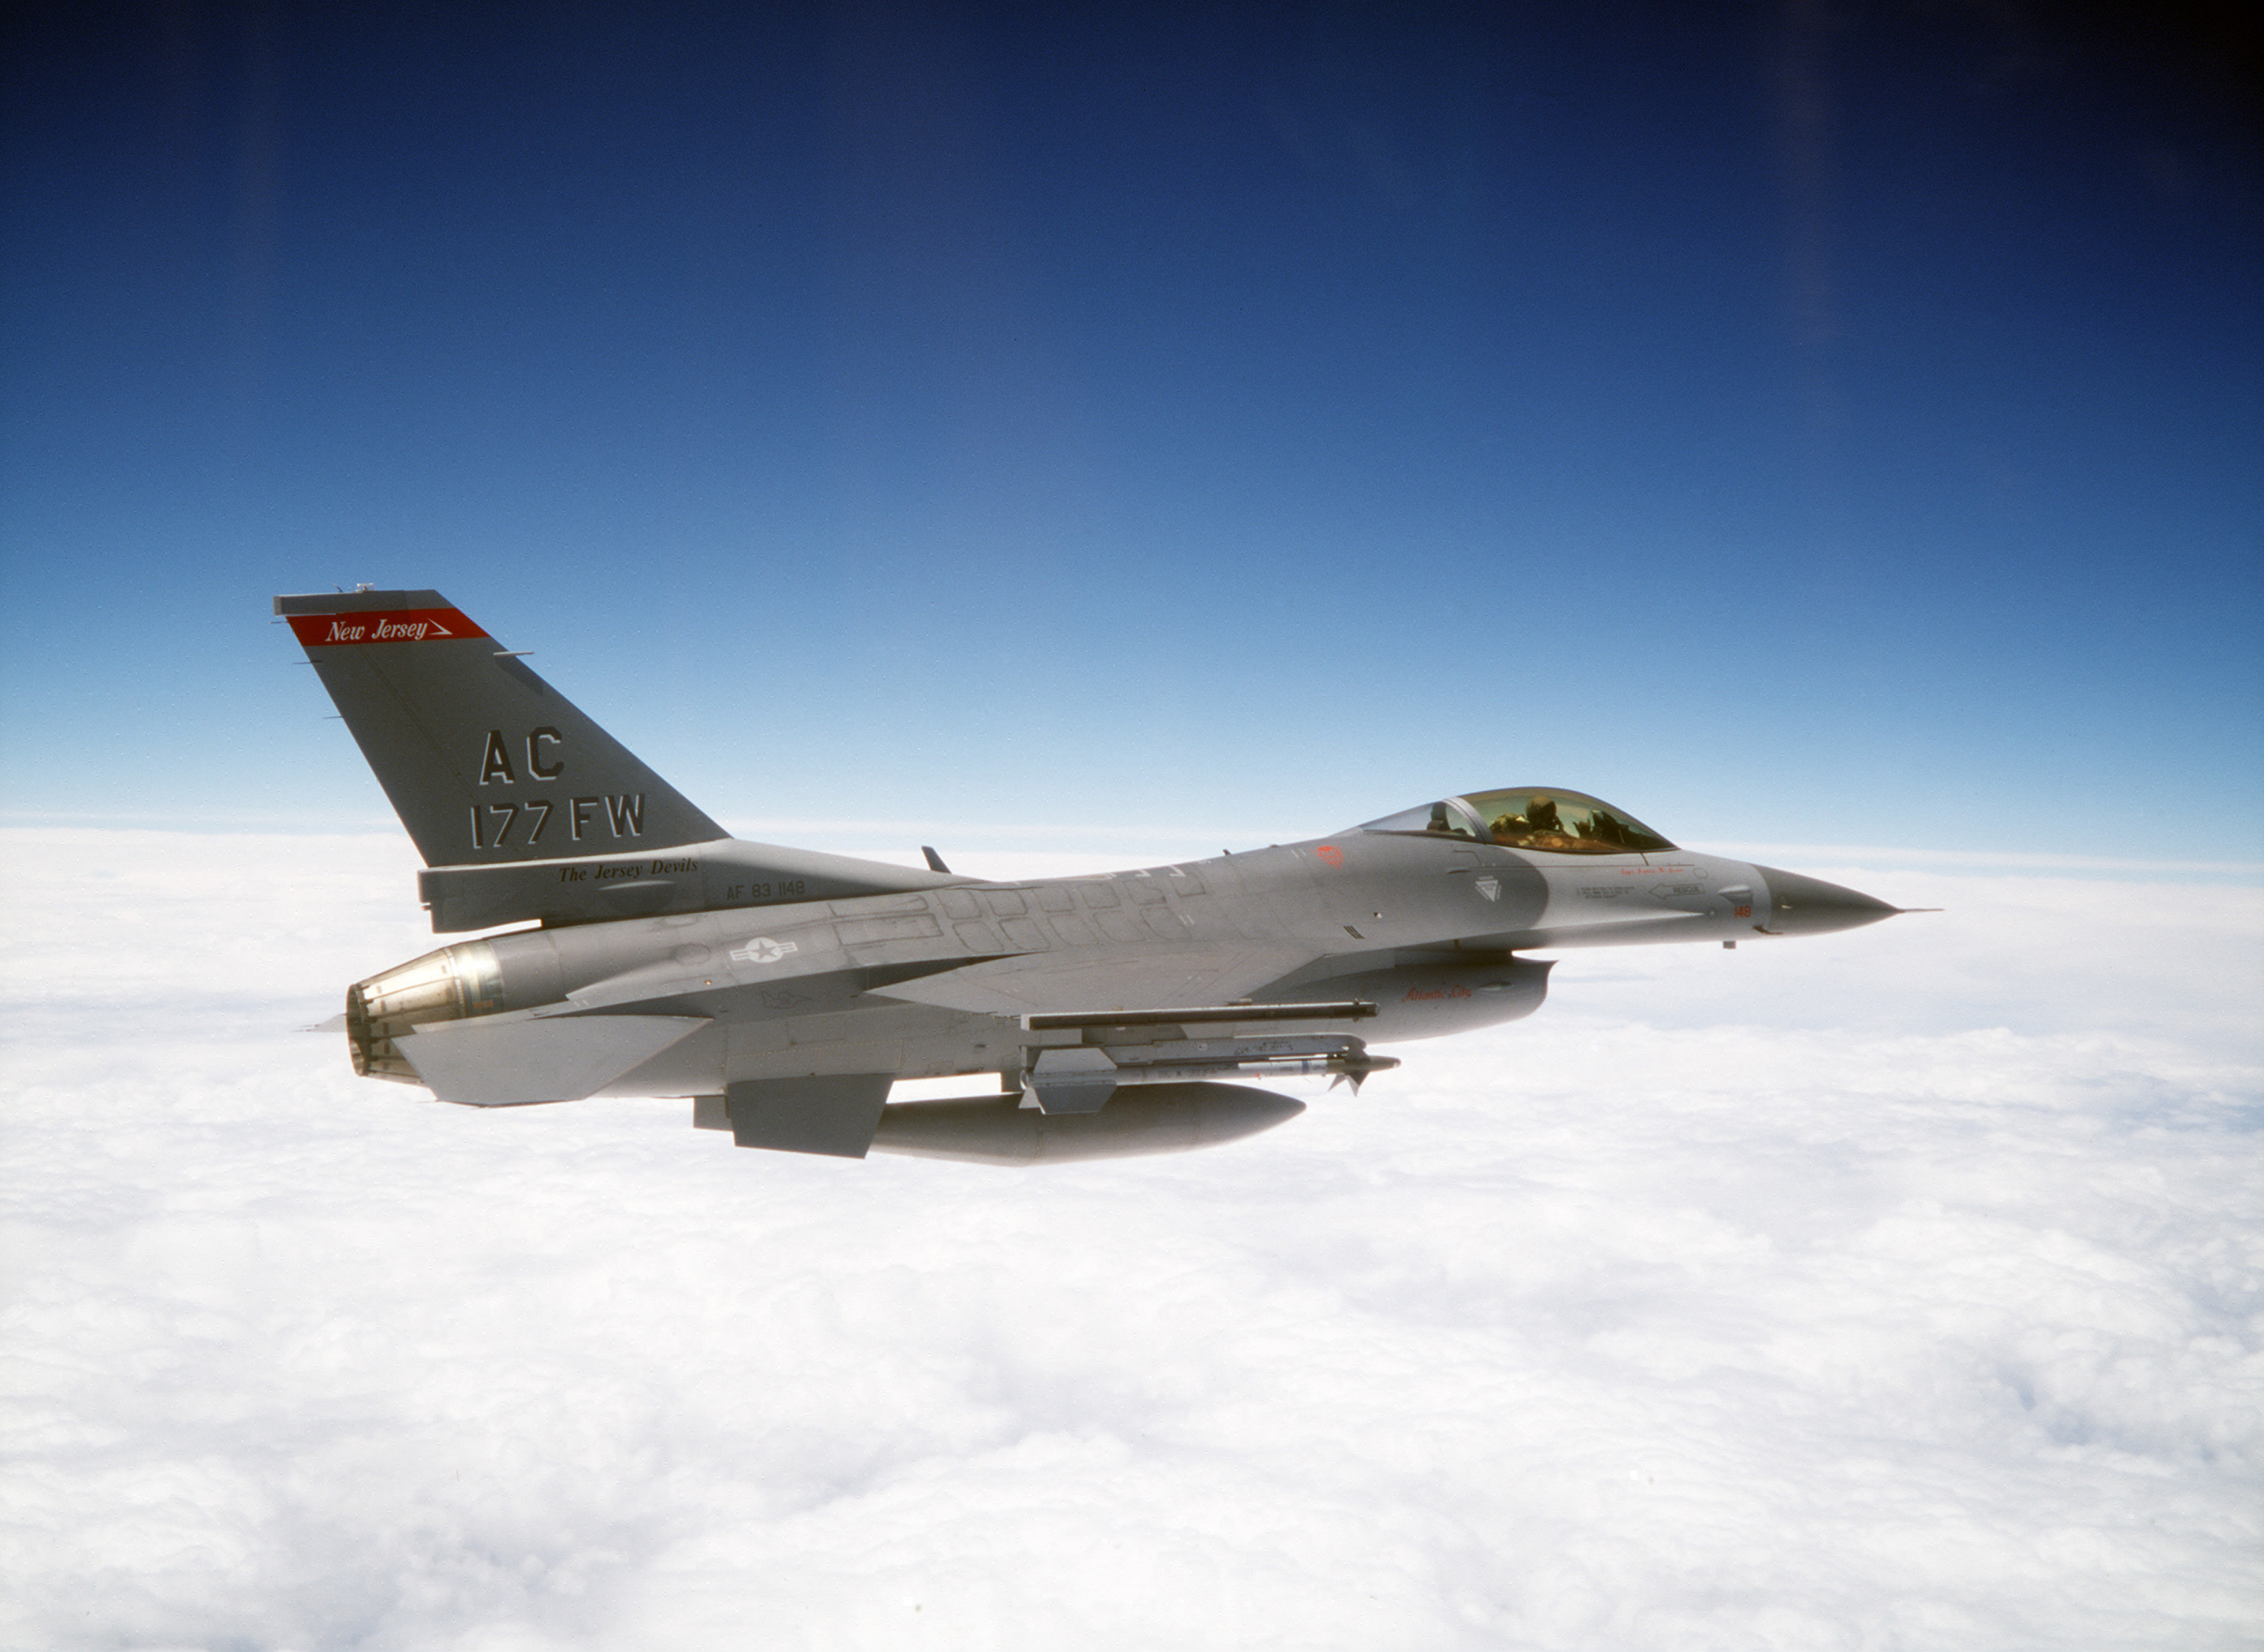 A F-16 Fighting Falcon similar to this example from the 177th Fighter Wing will be flying a sprited demonstration routine at Wings Over Houston. The F-16 will be coming from the 138th FW in Tulsa, Oklahoma. (U.S. Air Force photo by MSgt. Don Taggart)